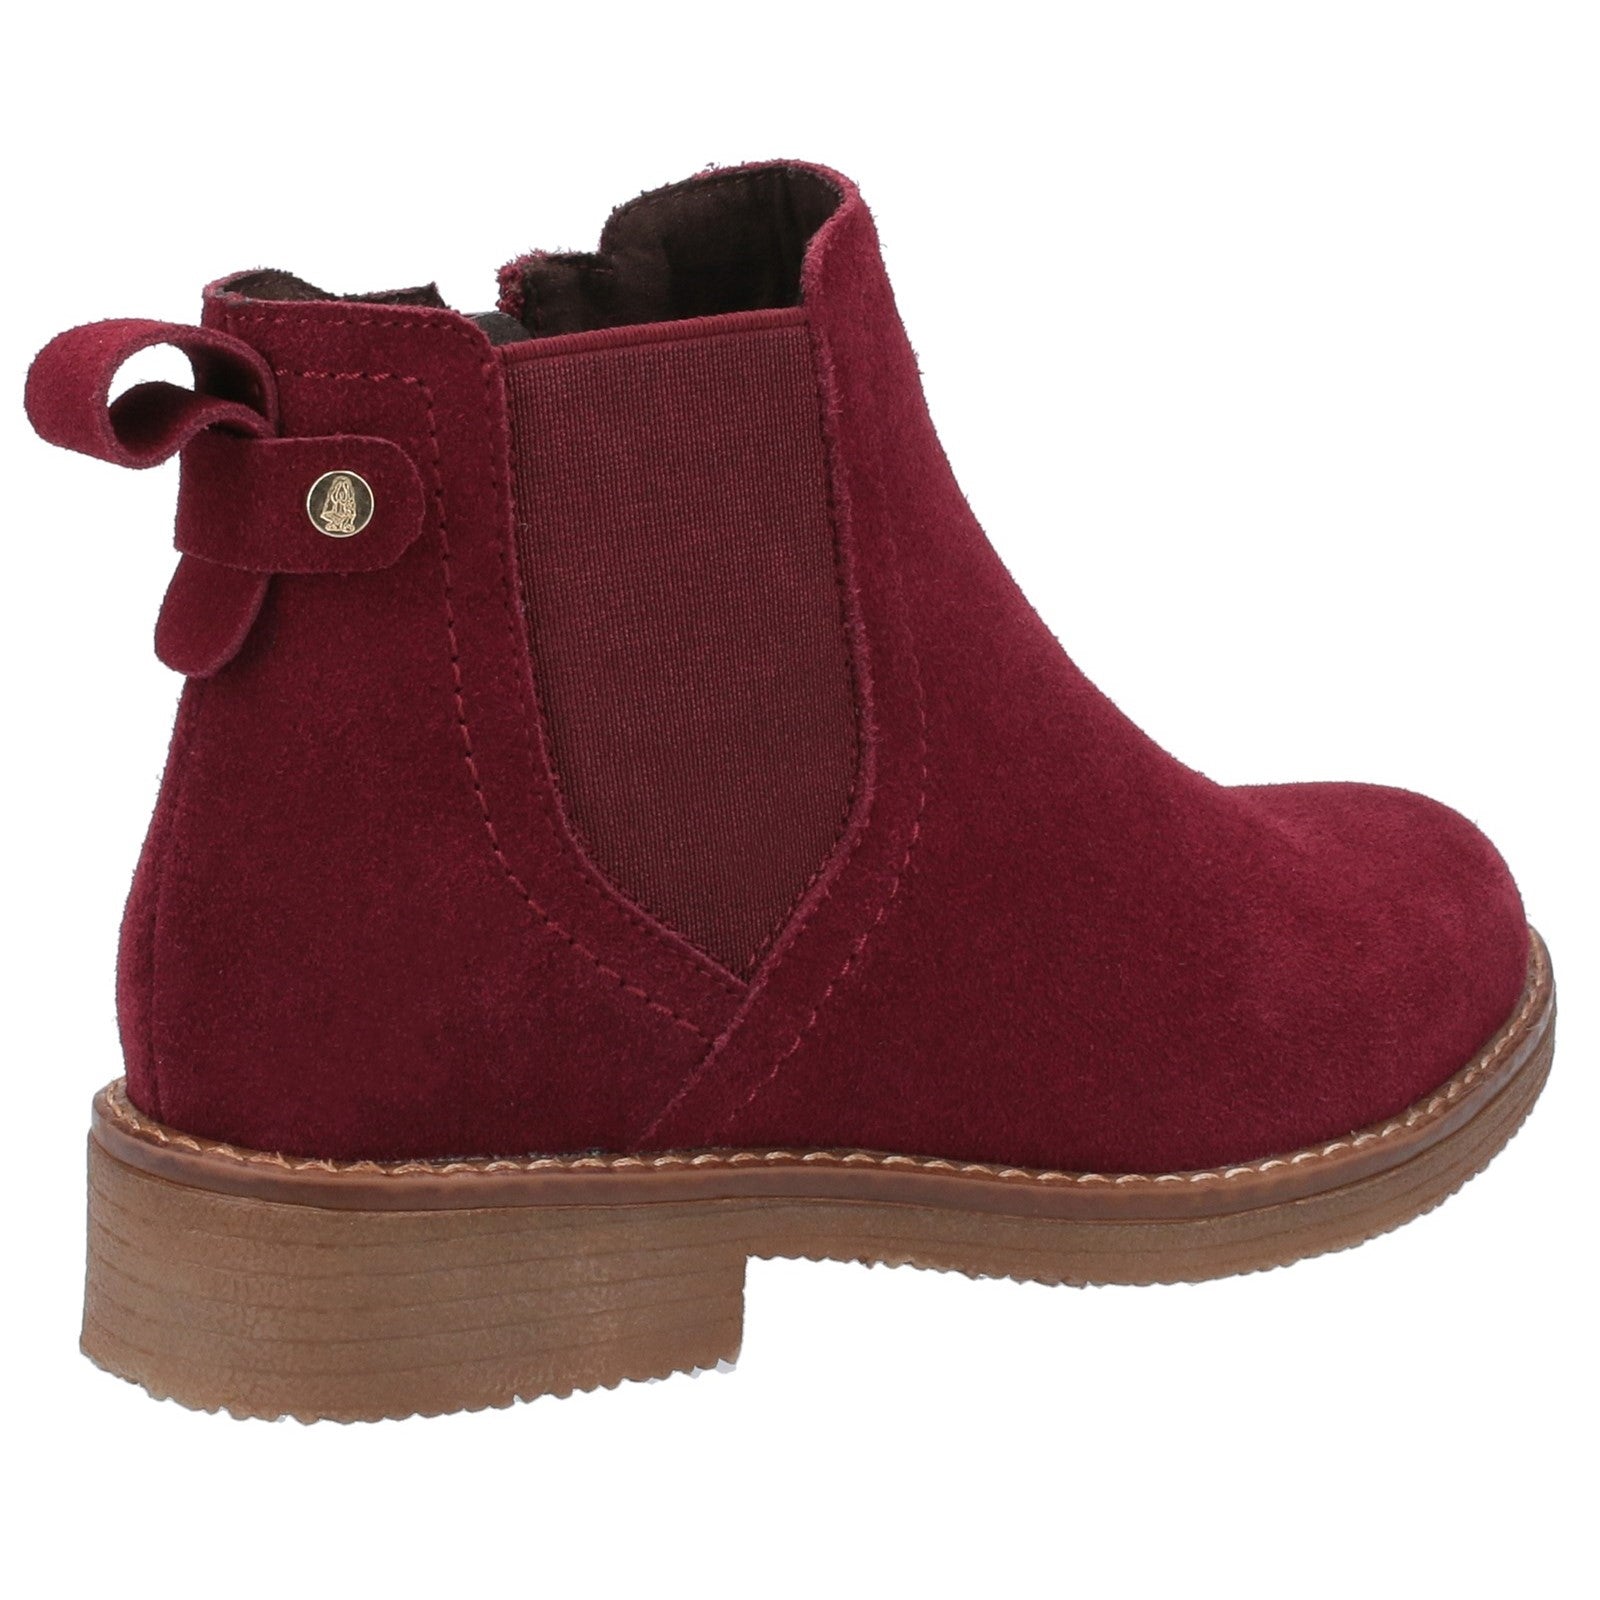 Hush Puppies Maddy Ladies Bordo Suede Side Zip Ankle Boots